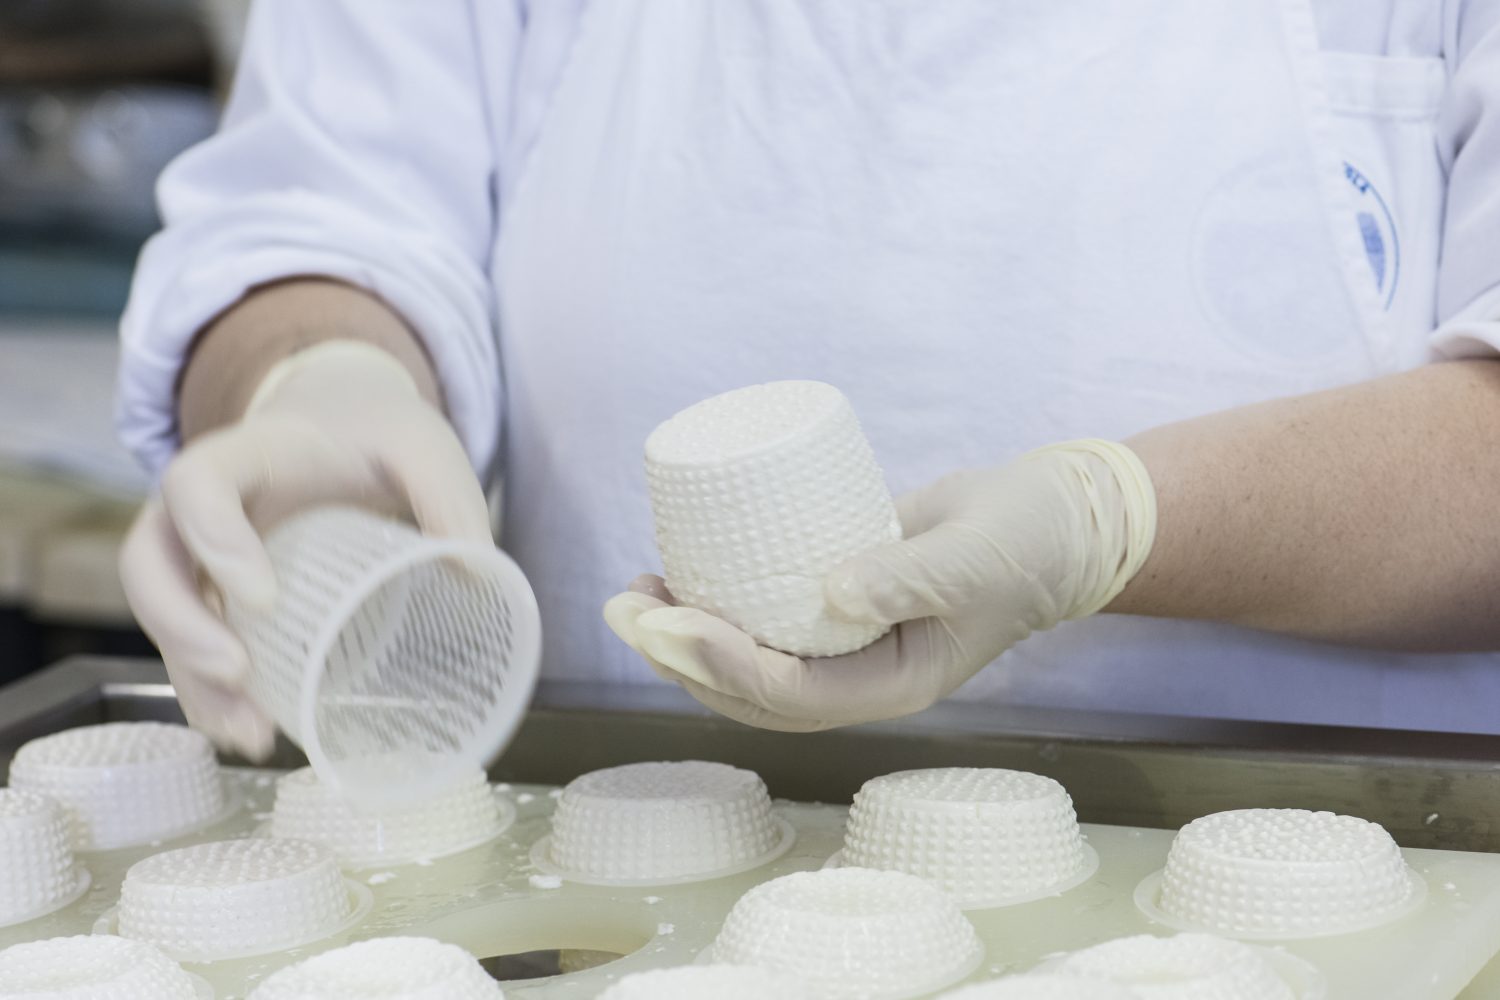 Removing ricotta cheese from molds